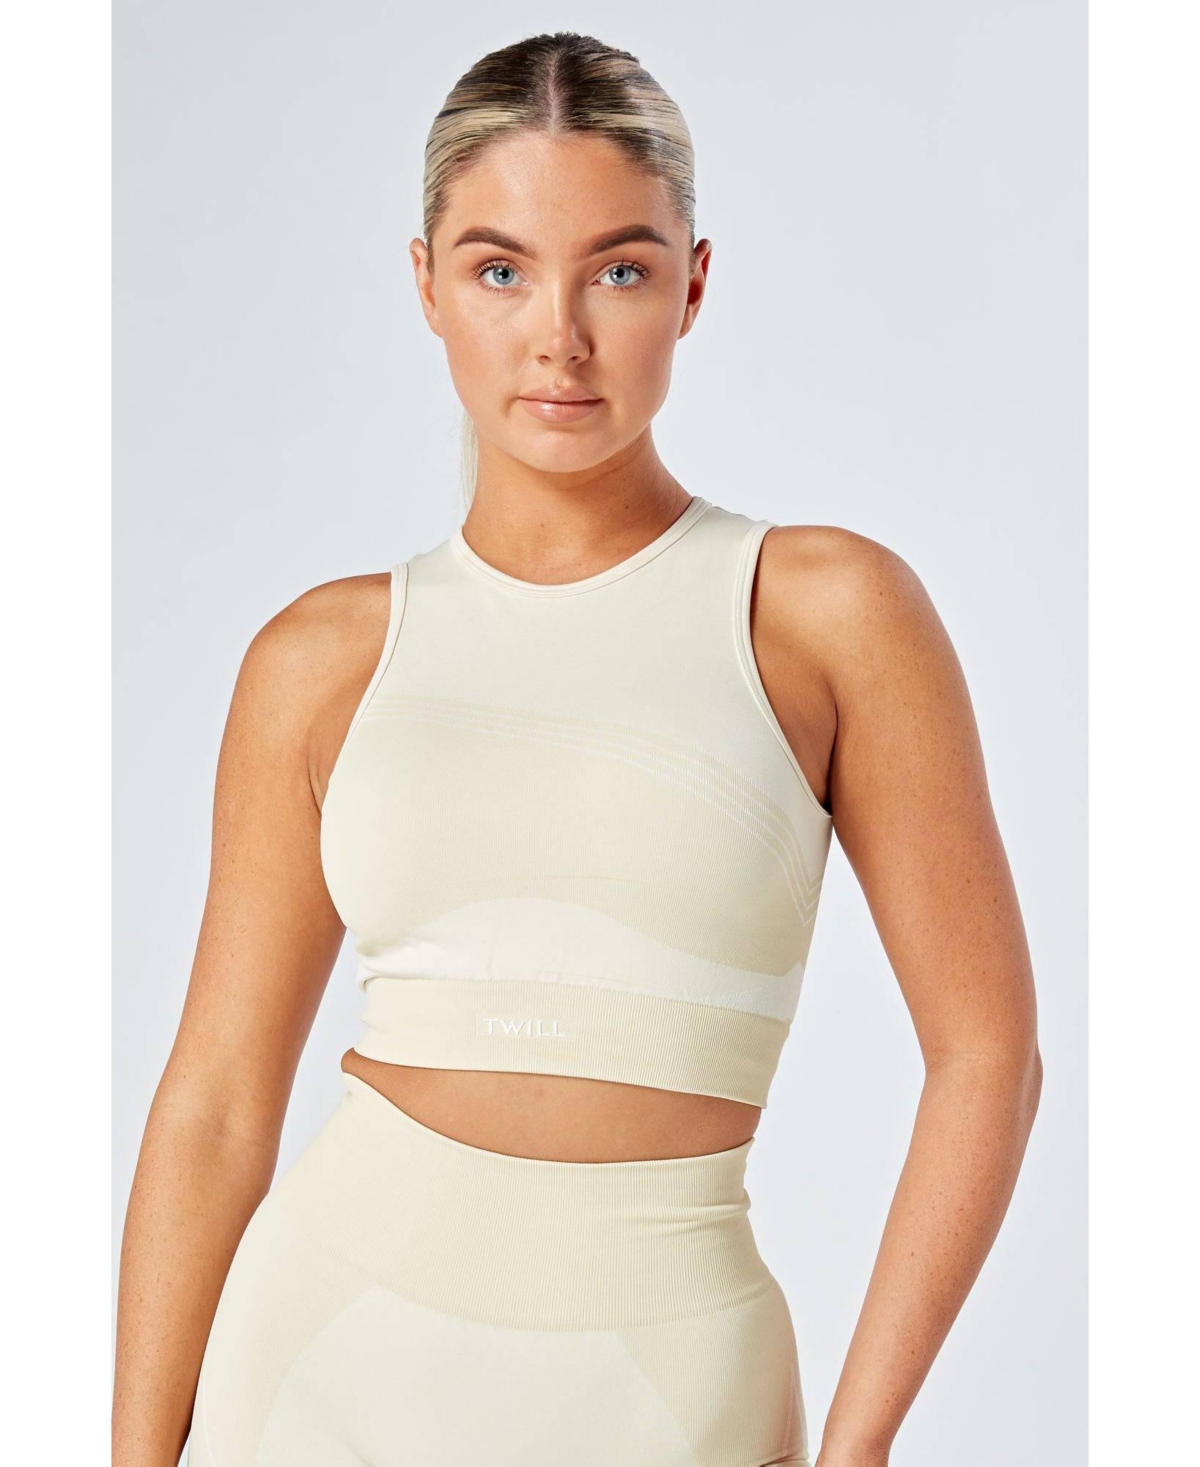 TWILL ACTIVE WOMEN'S RECYCLED COLOUR BLOCK BODY FIT RACER CROP TOP